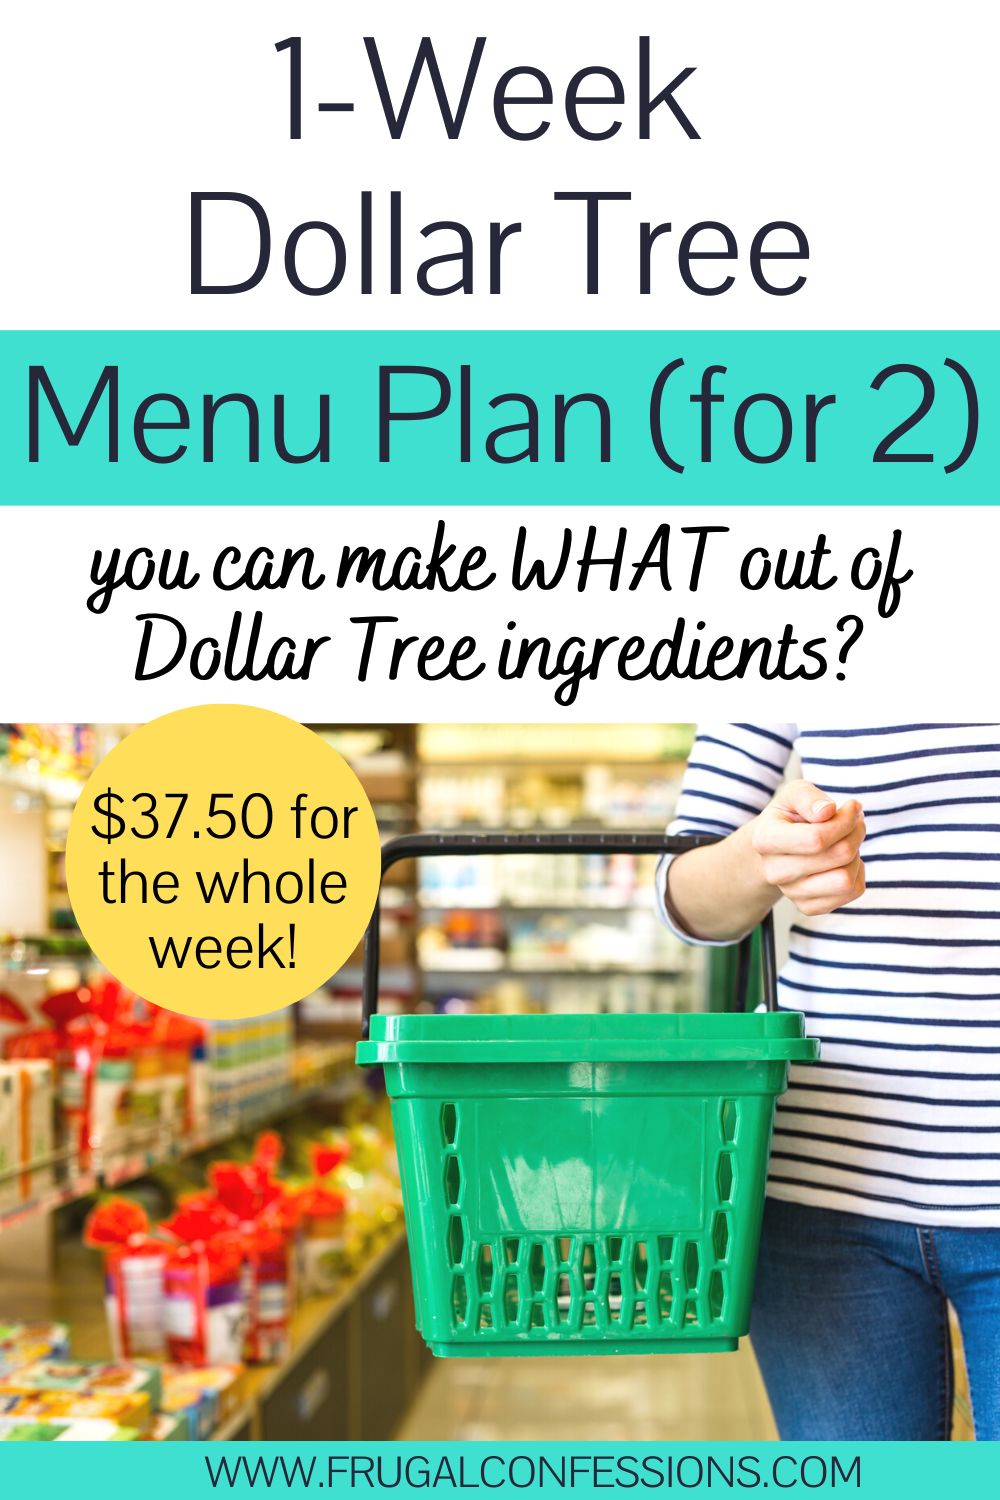 woman with green Dollar Tree basket in store, text overlay "1-week dollar tree meal plan for 2"